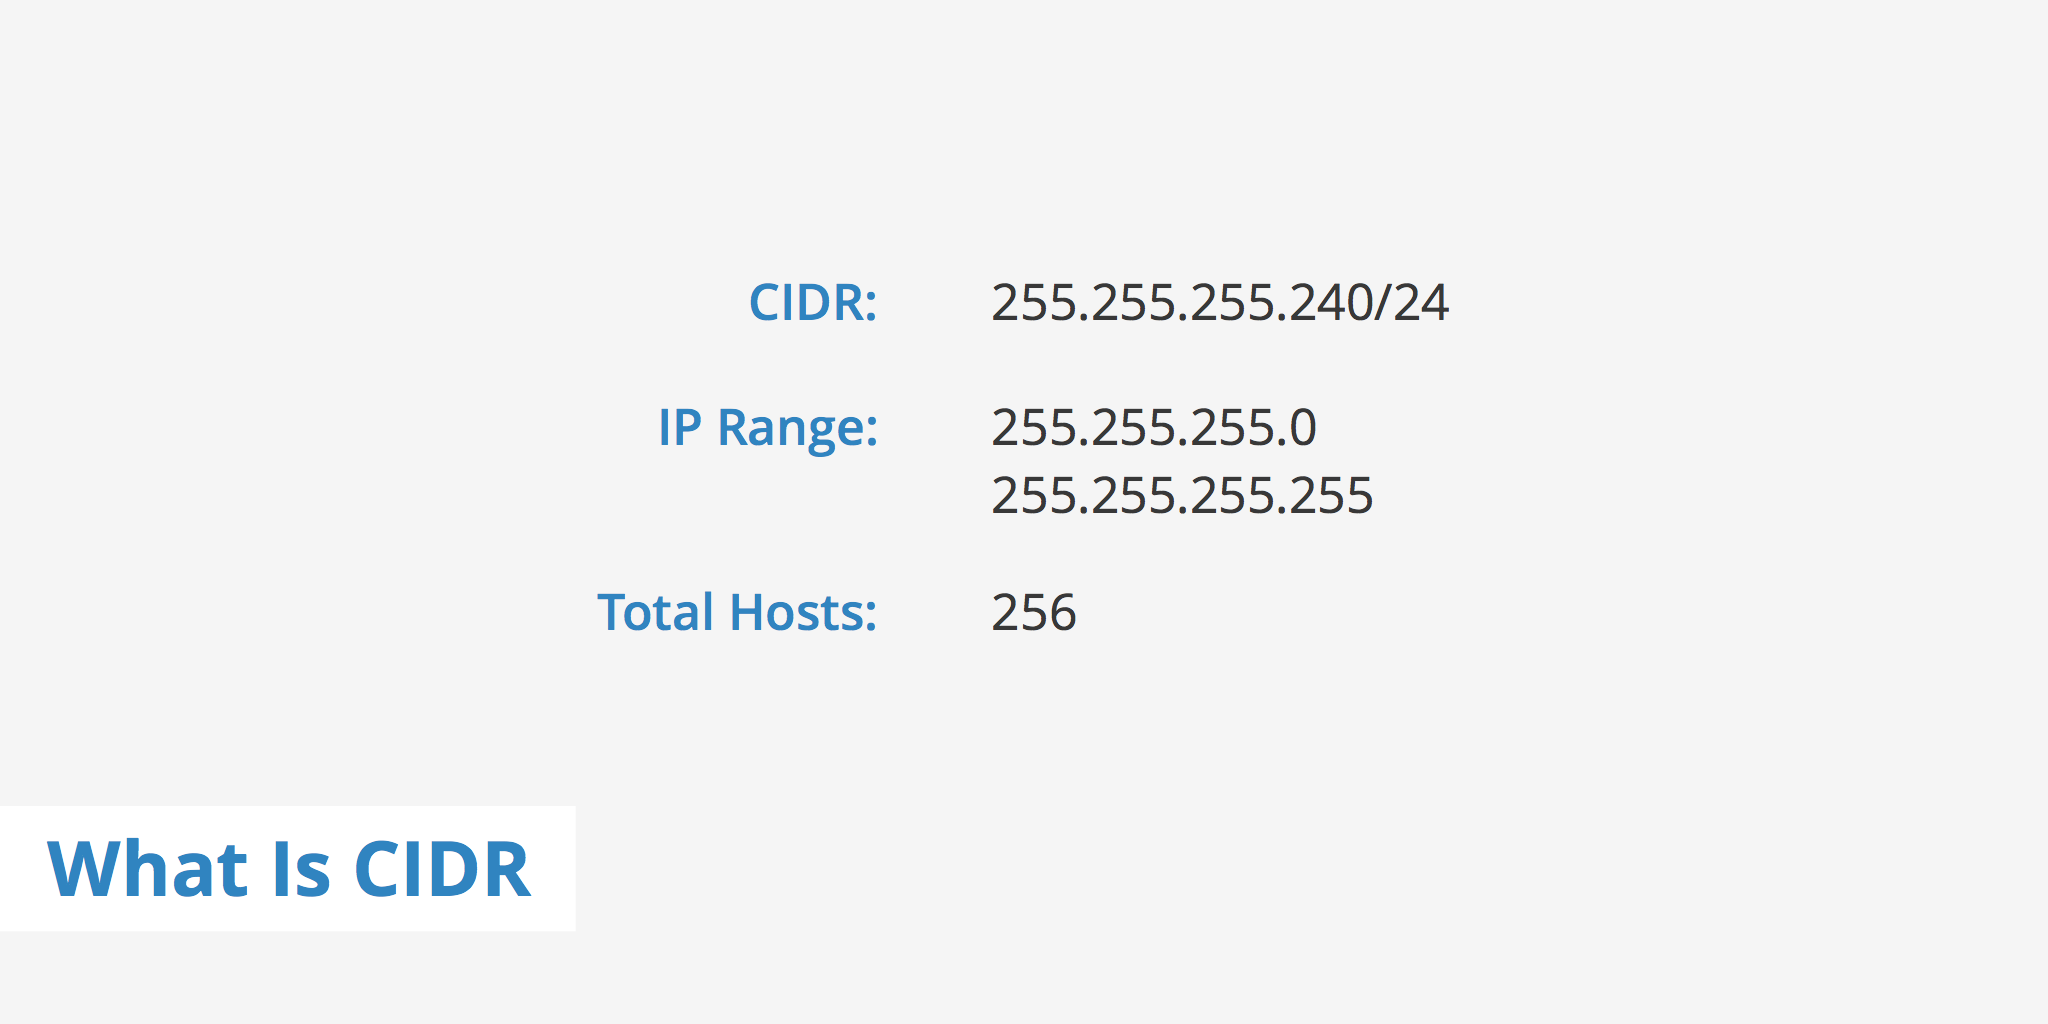 What Is CIDR (Classless Inter-Domain Routing)?